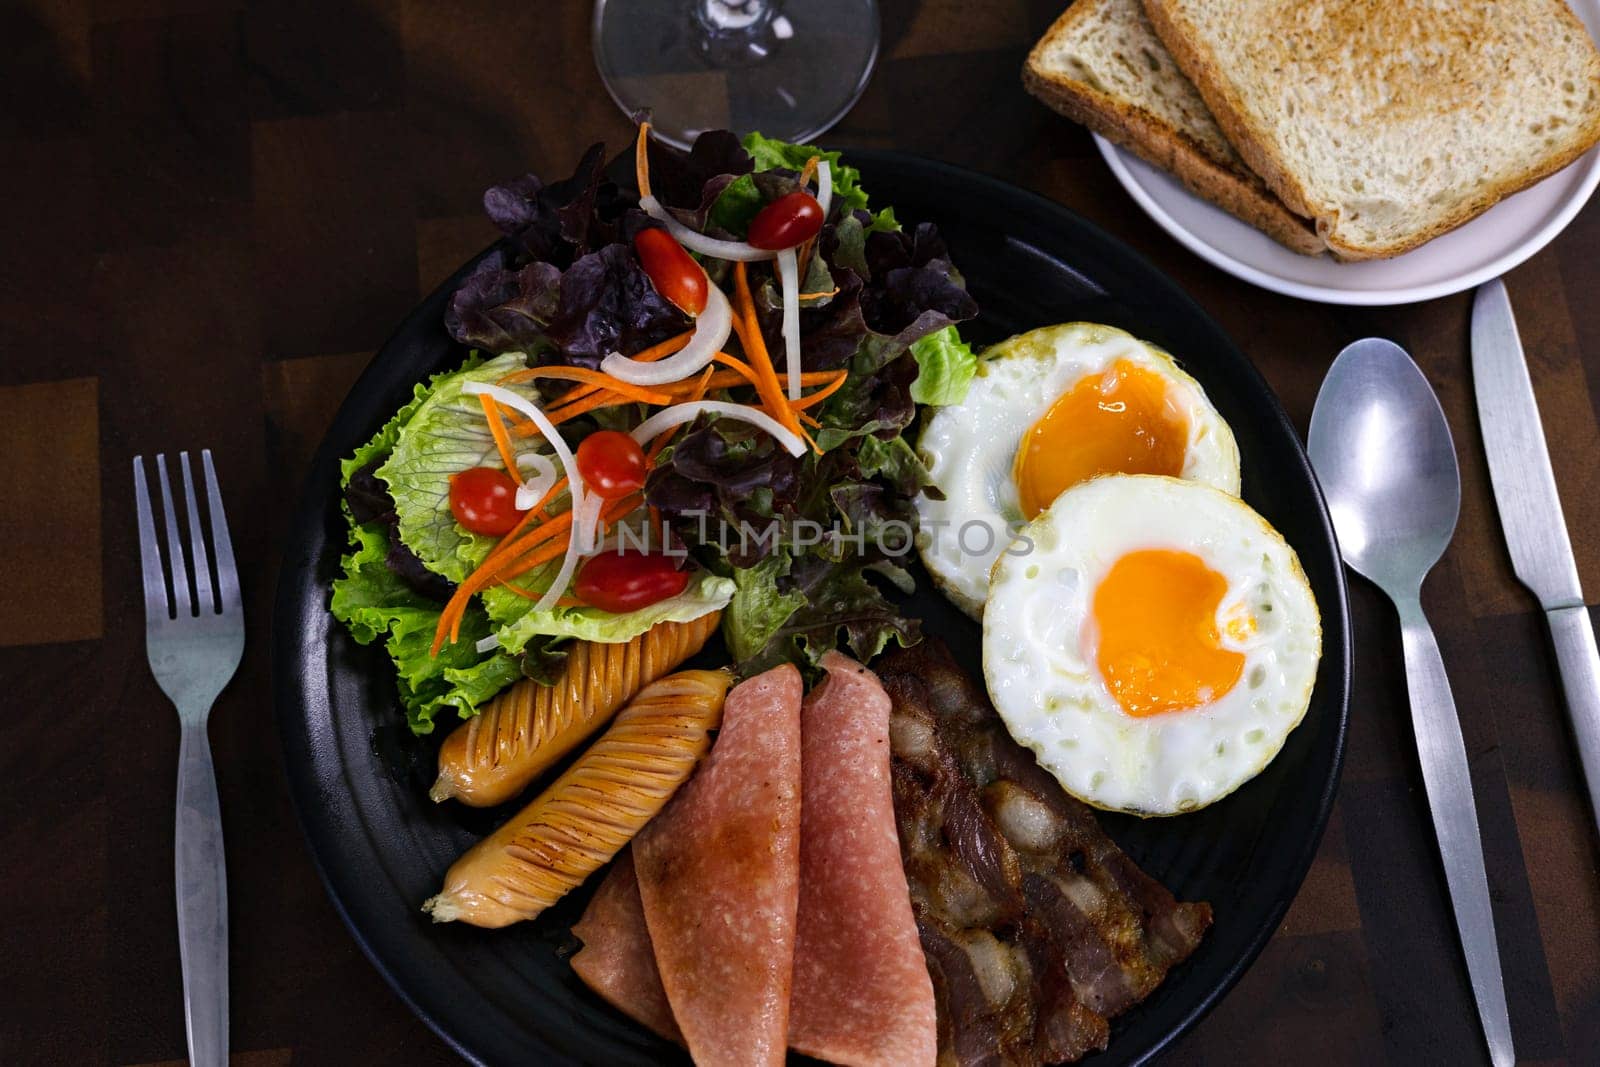 Healthy Breakfast With Fresh Organic Vegetable Salad Fried Egg And Sausages by urzine